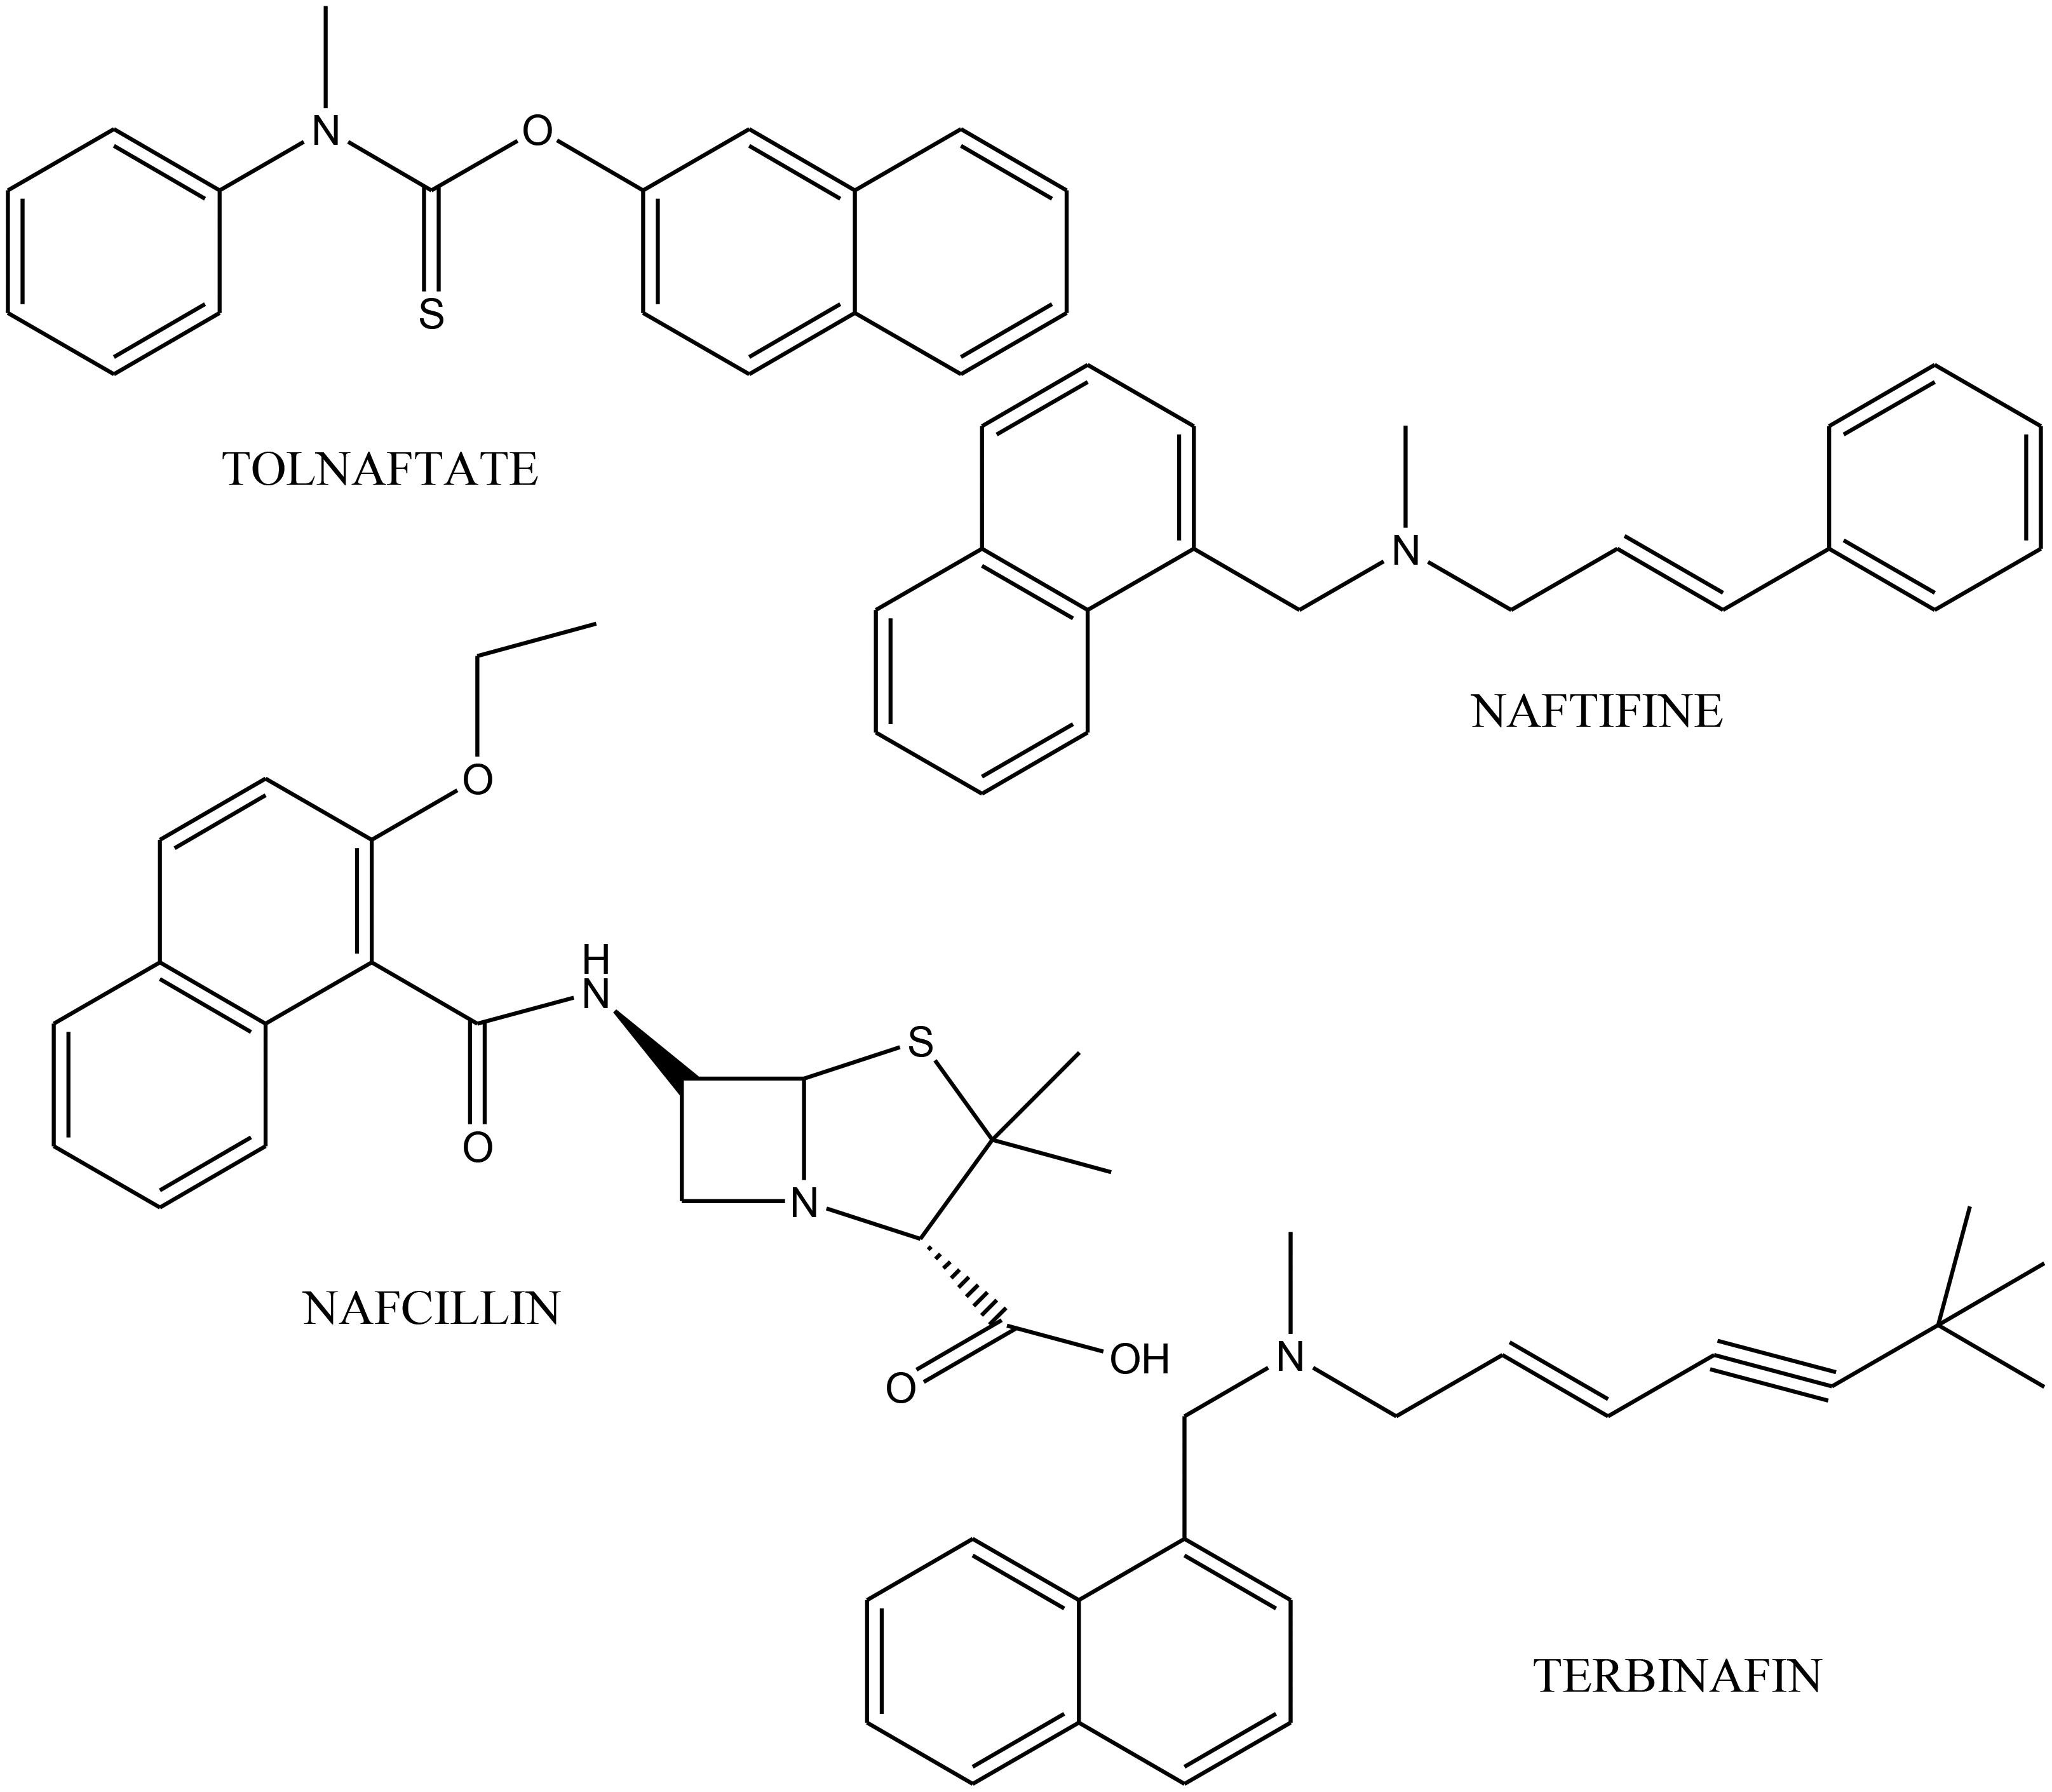 Structure of clinically used naphthalene nucleus-containing antimicrobial drugs.